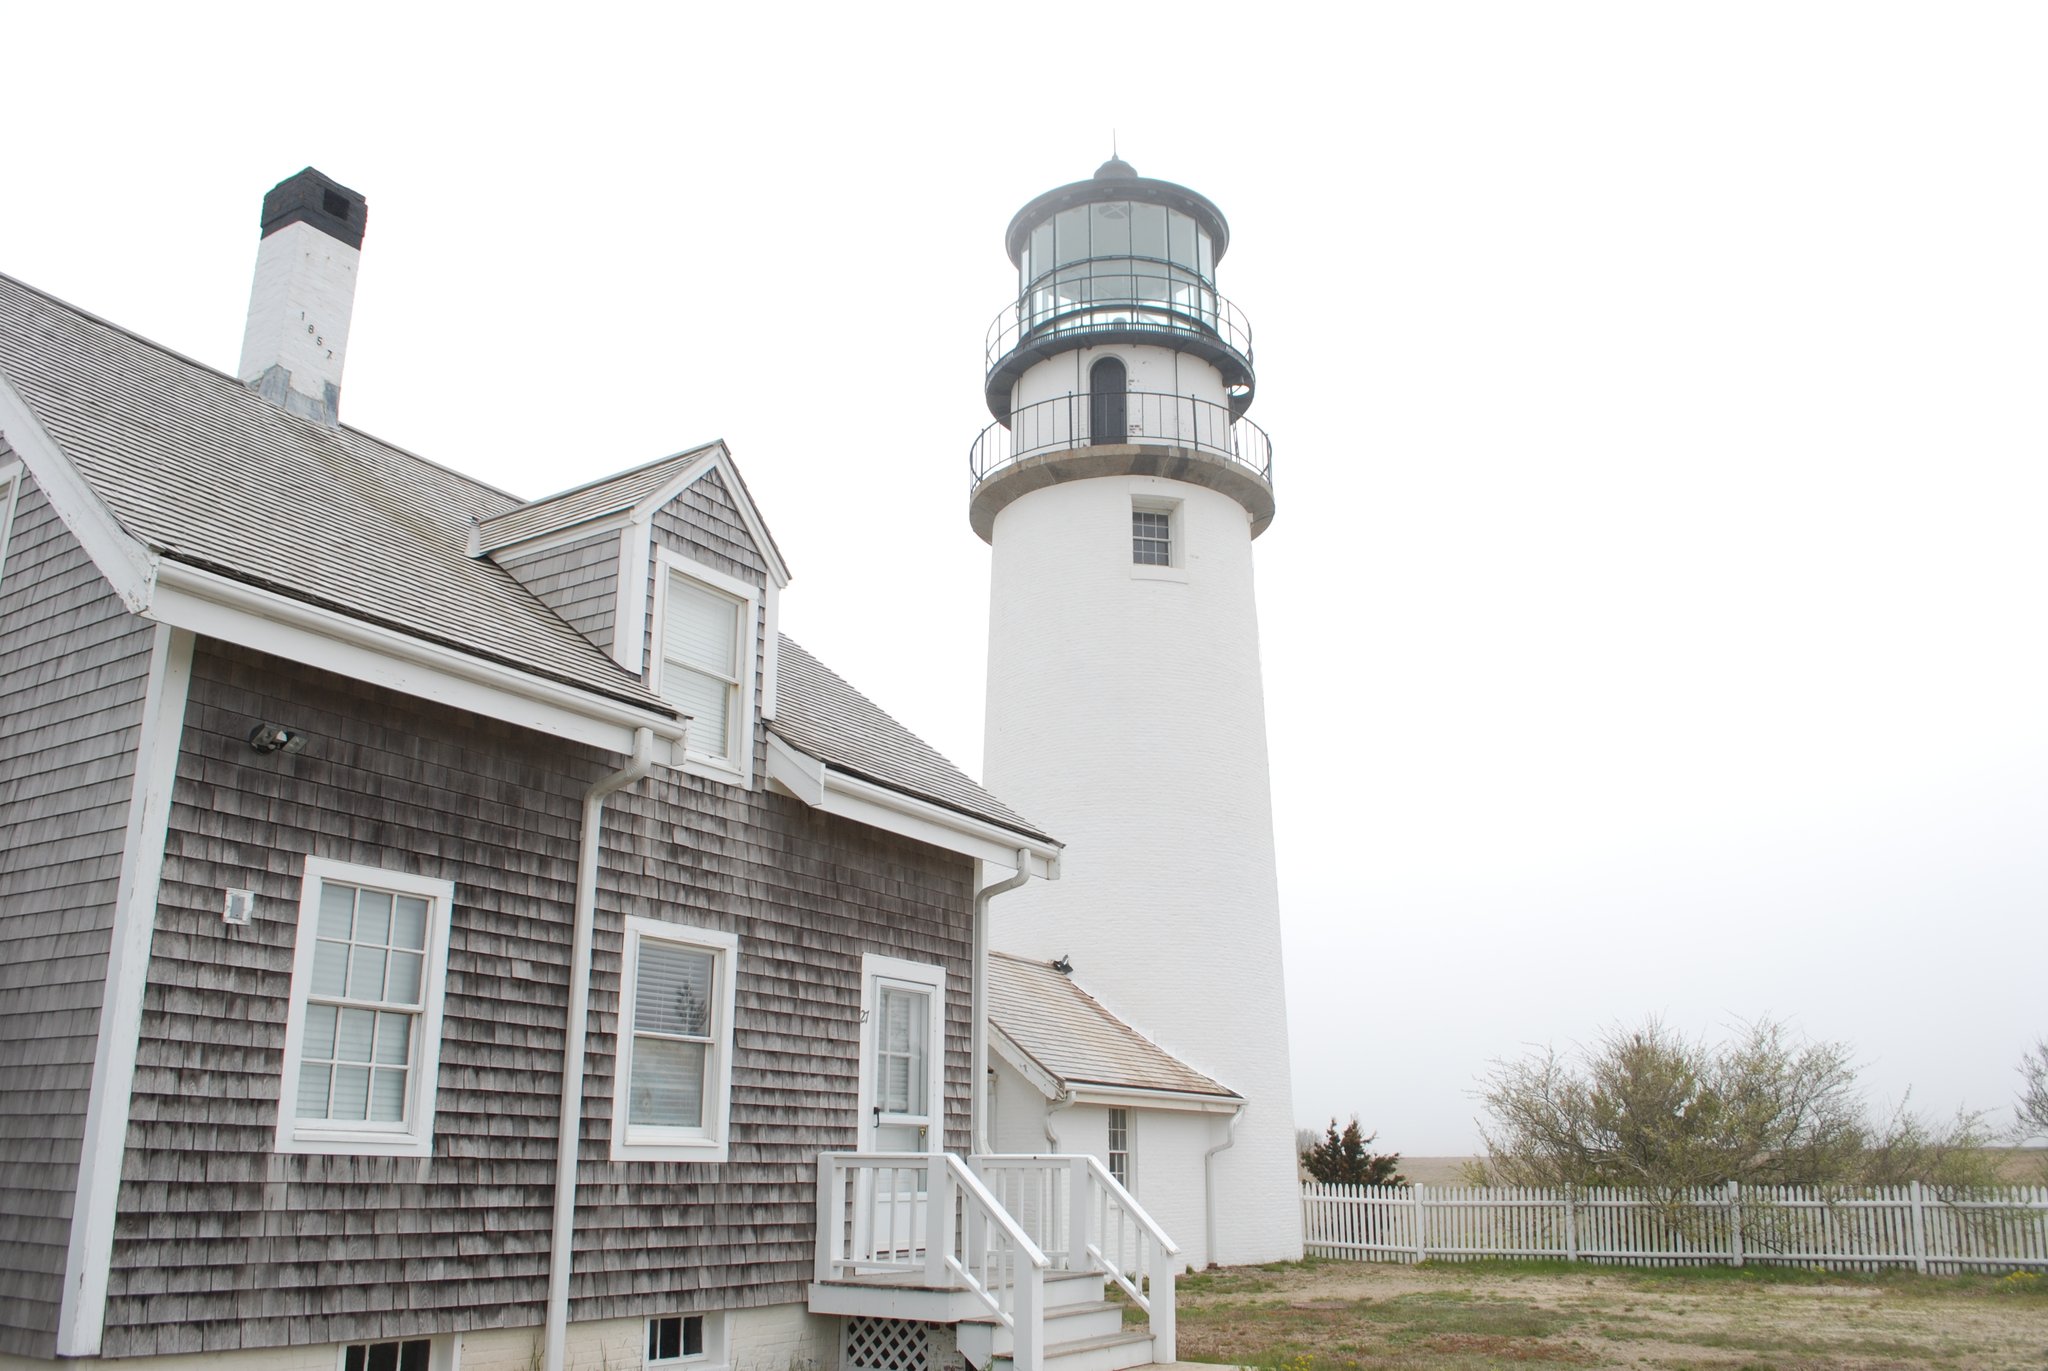 Highland Light and the Keepers House